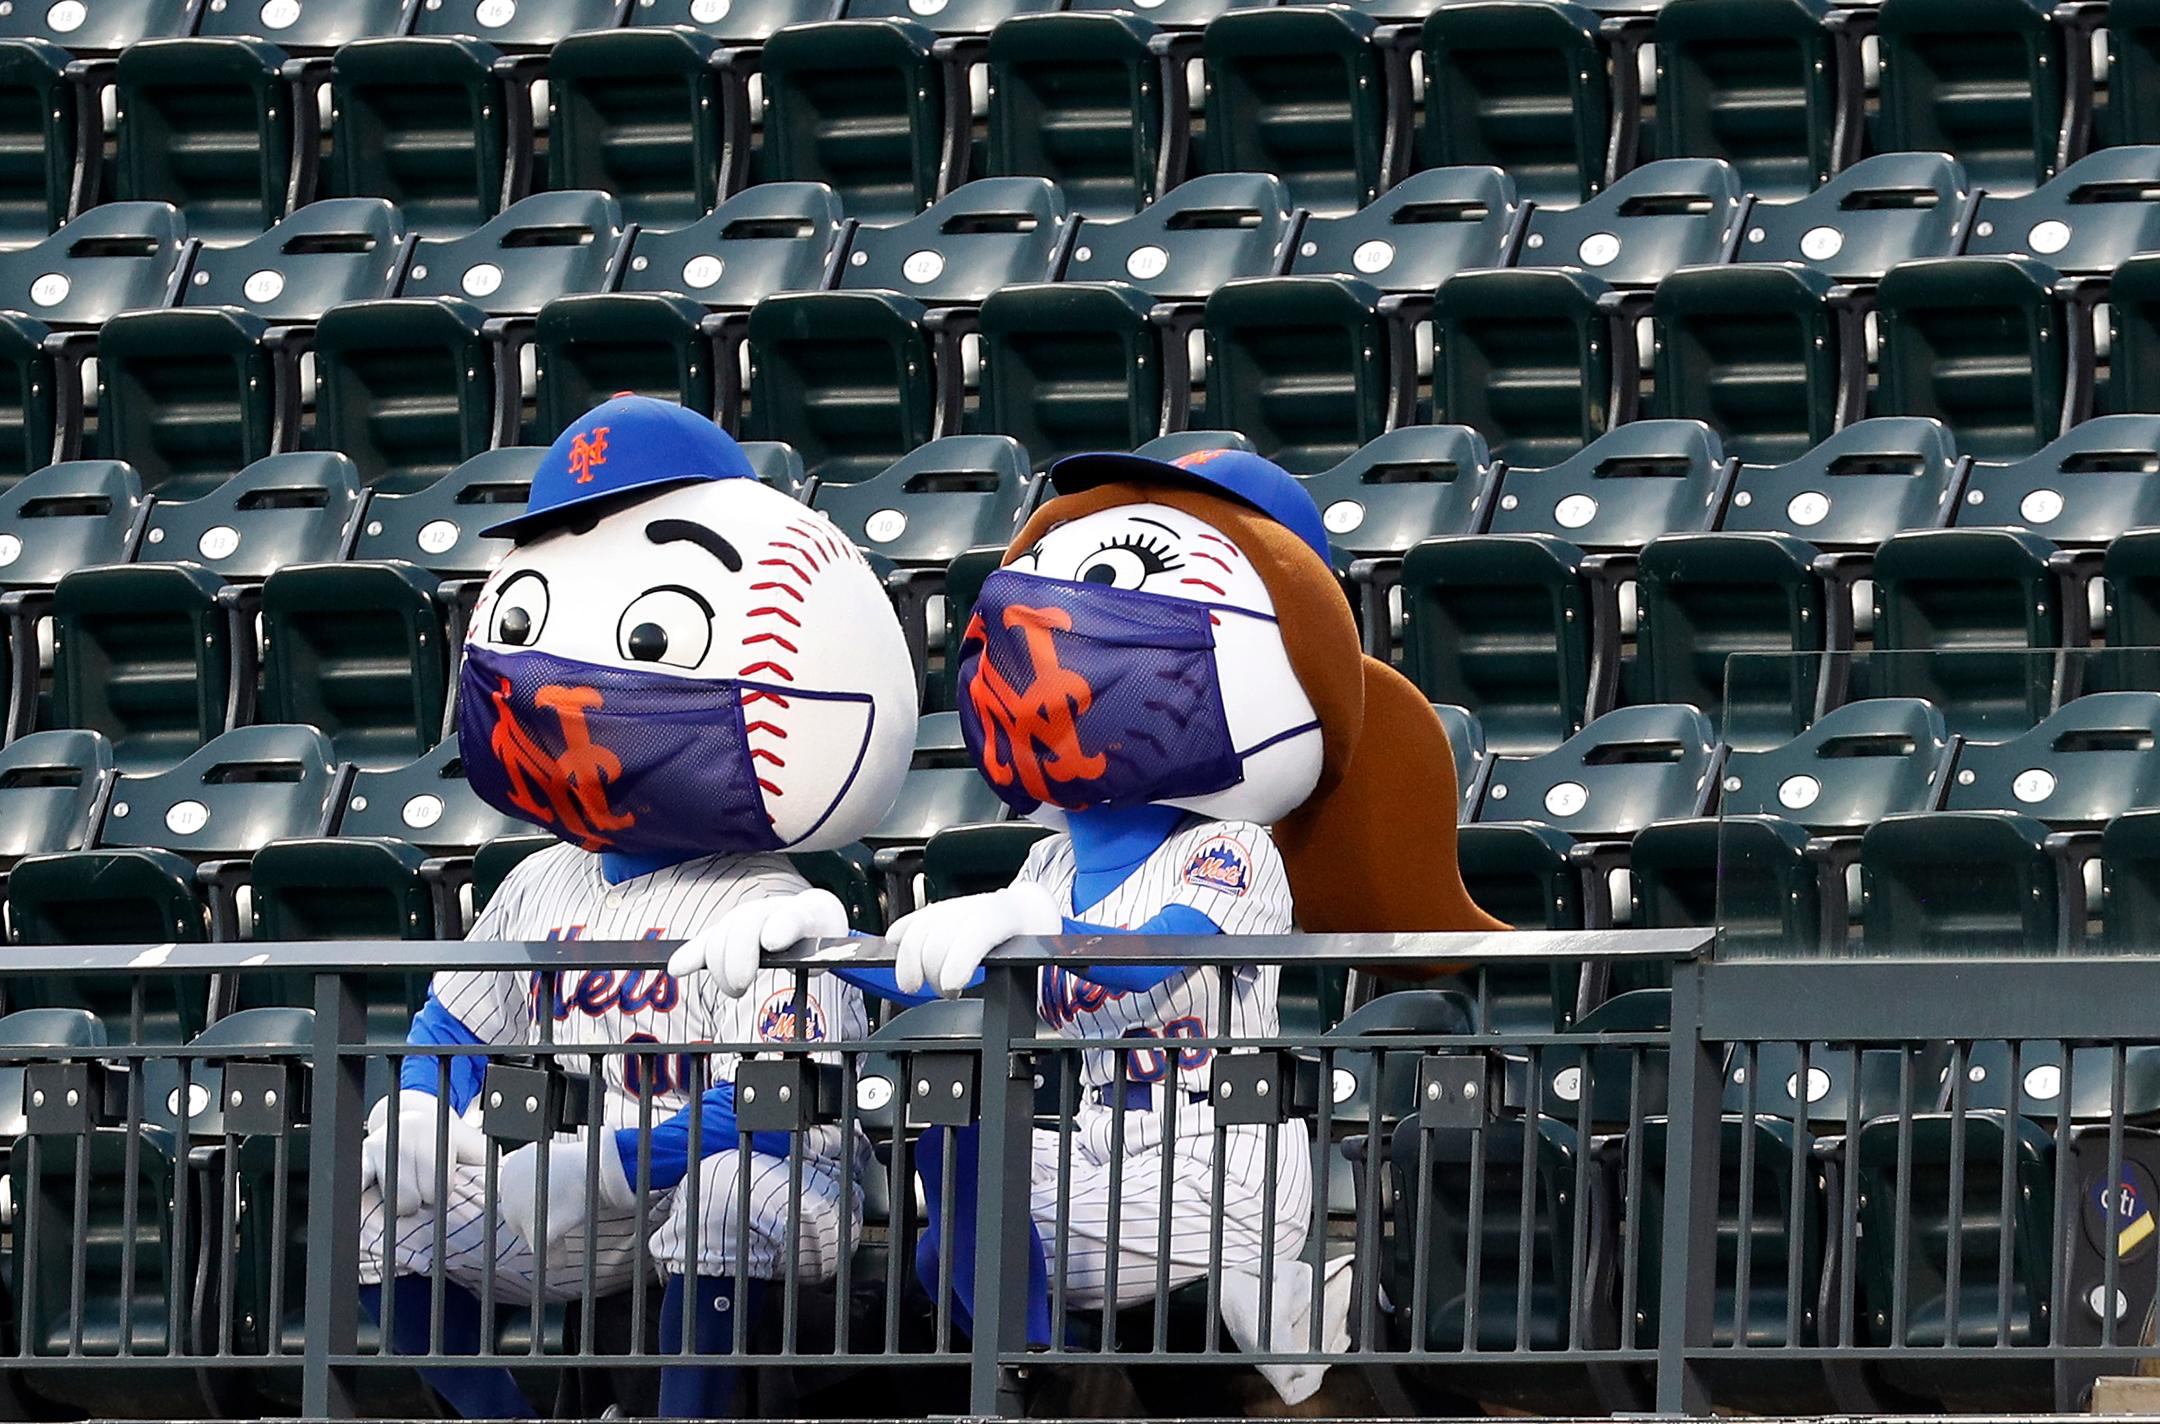 Mr. and Mrs. Met sit next to each other while wearing masks in an empty stadium